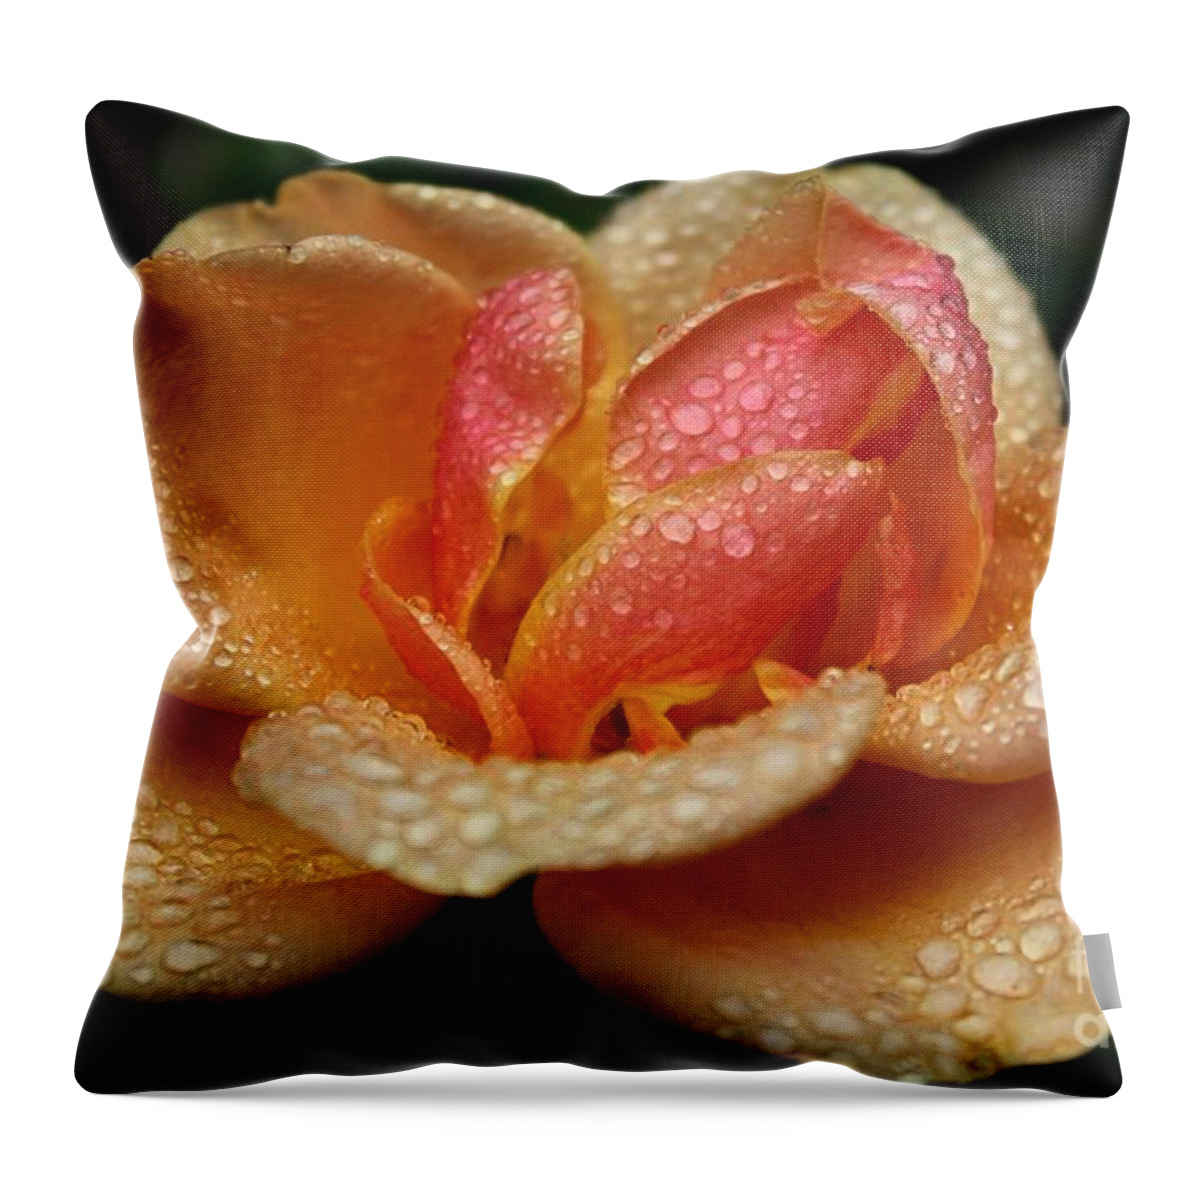 Rose Throw Pillow featuring the photograph Rose Beads by Kim Yarbrough